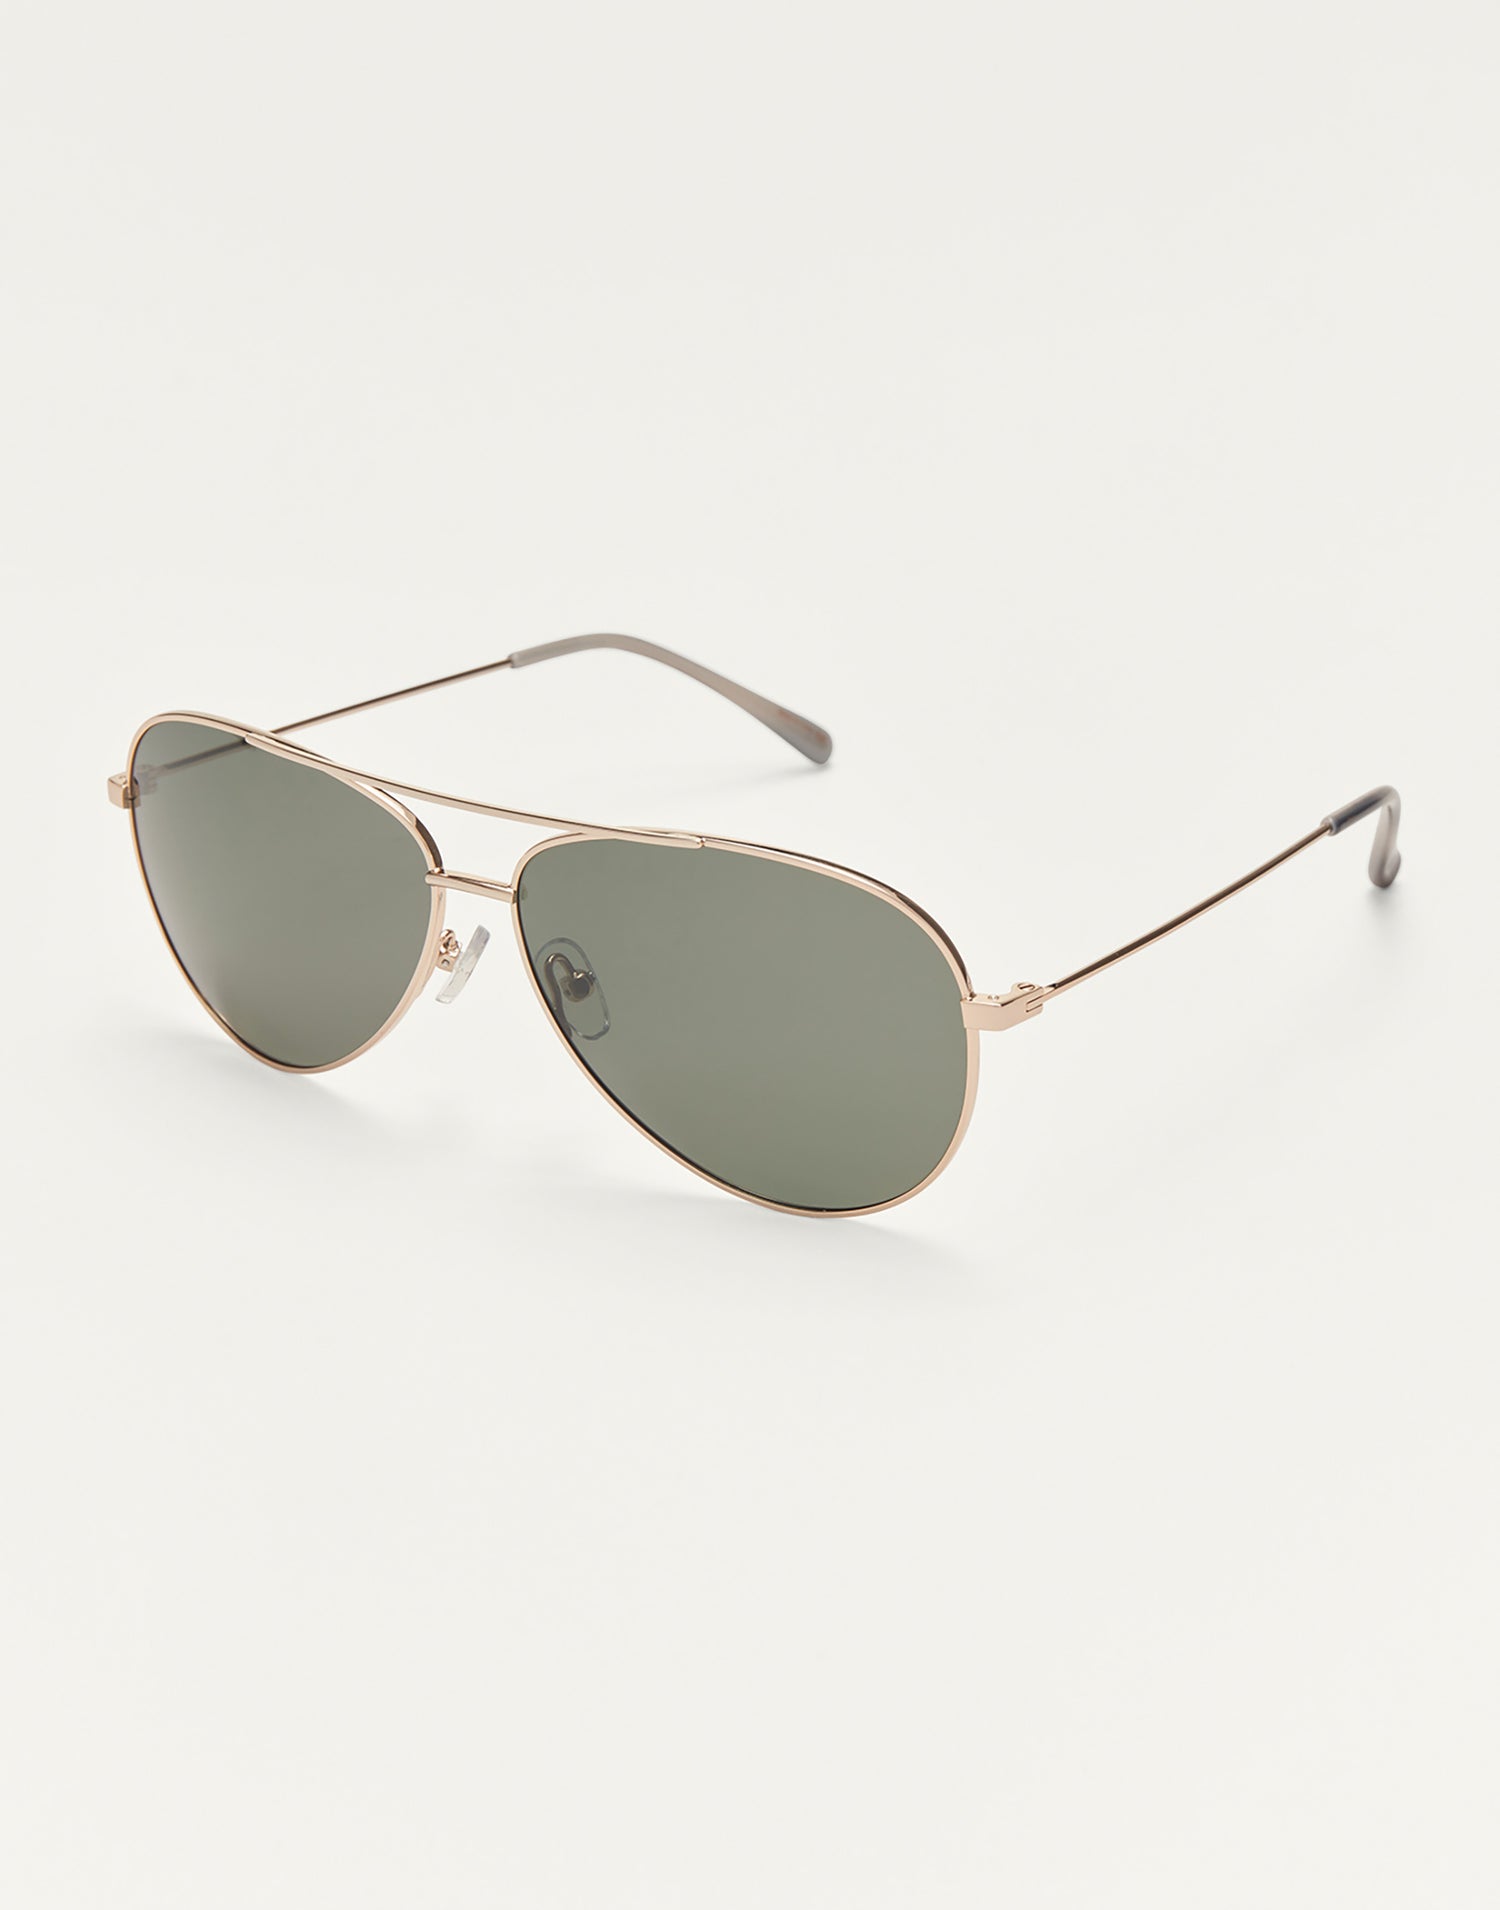 Driver Sunglasses by Z Supply in Gold - Angled View